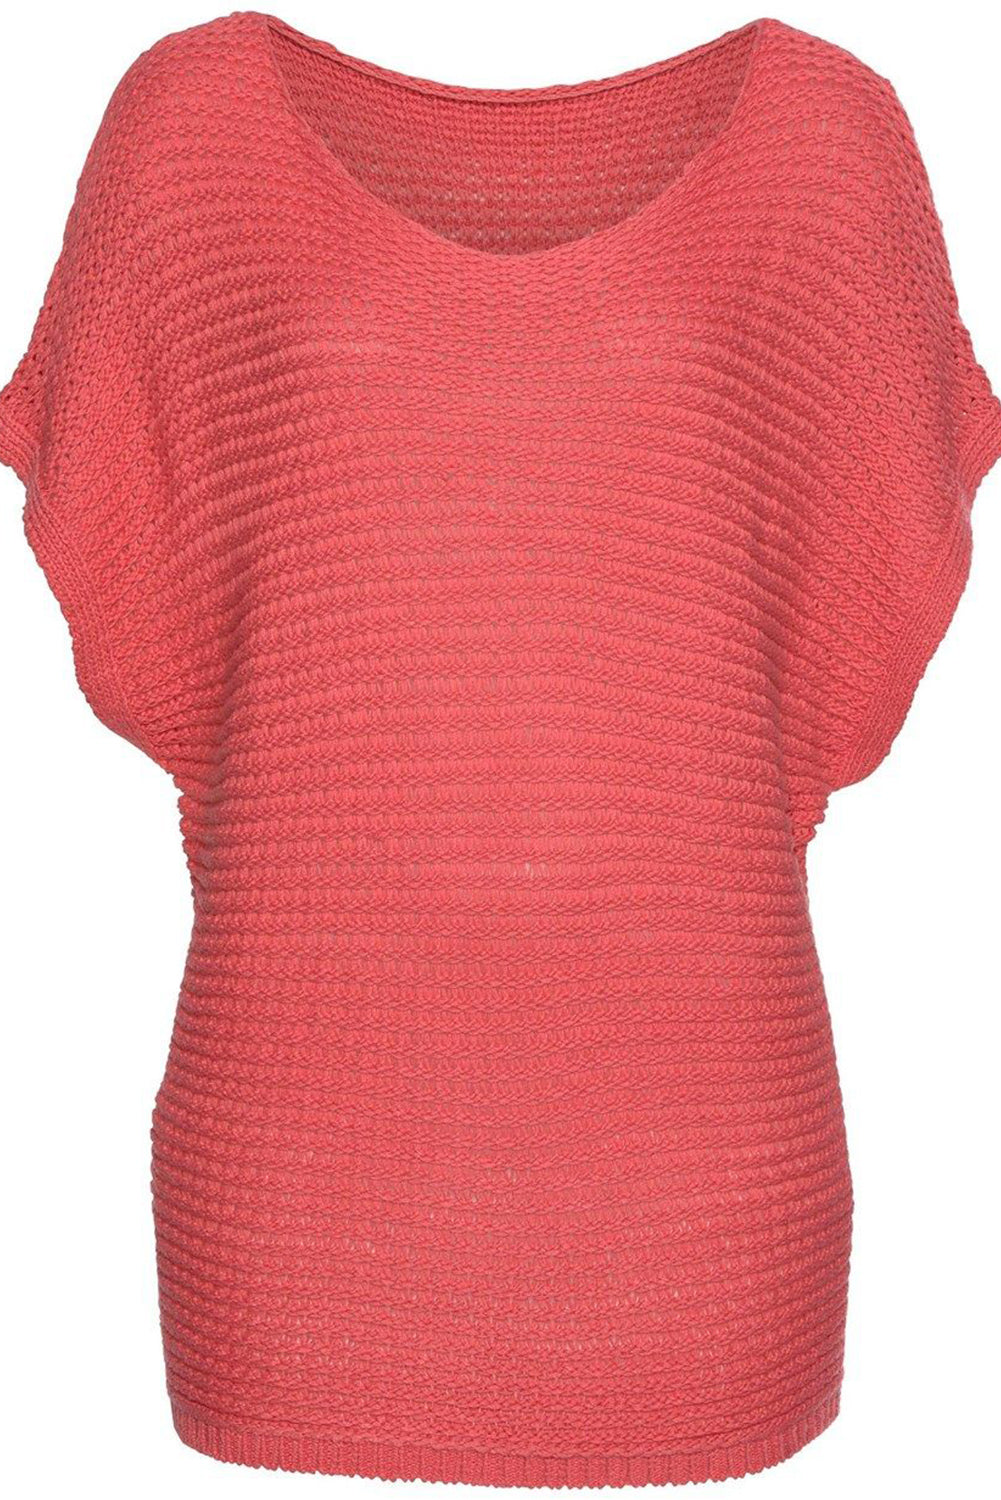 Red Clay Solid Short Dolman Sleeve Plus Size Knit Top Pre Order Plus Size JT's Designer Fashion